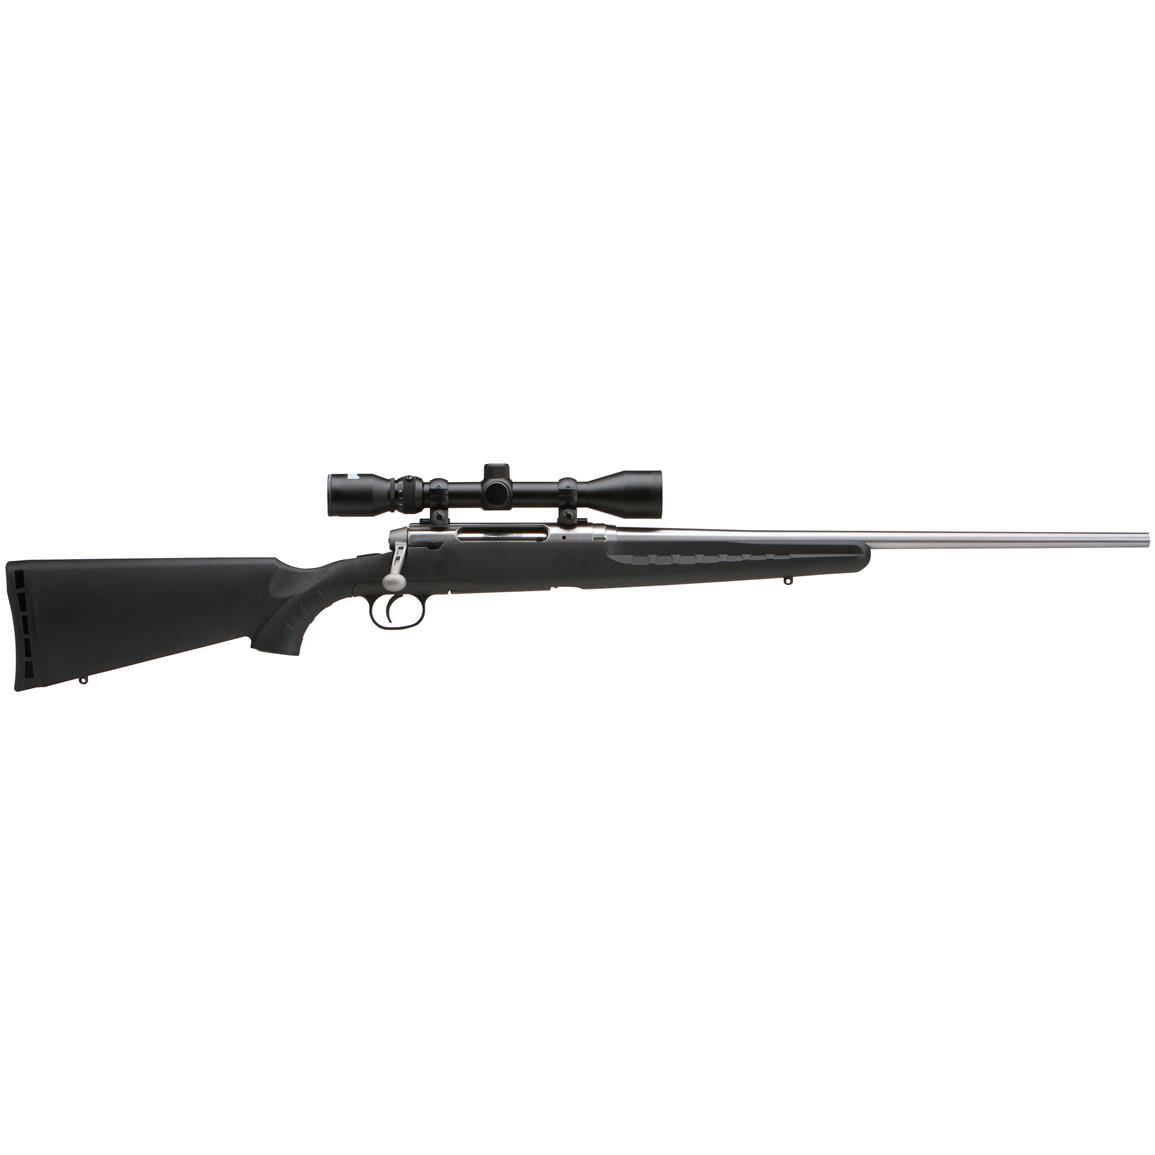 Savage Axis Stainless XP, Bolt Action, .308 Winchester, 22" Barrel, 3-9x40mm Scope, 4 1 Rounds